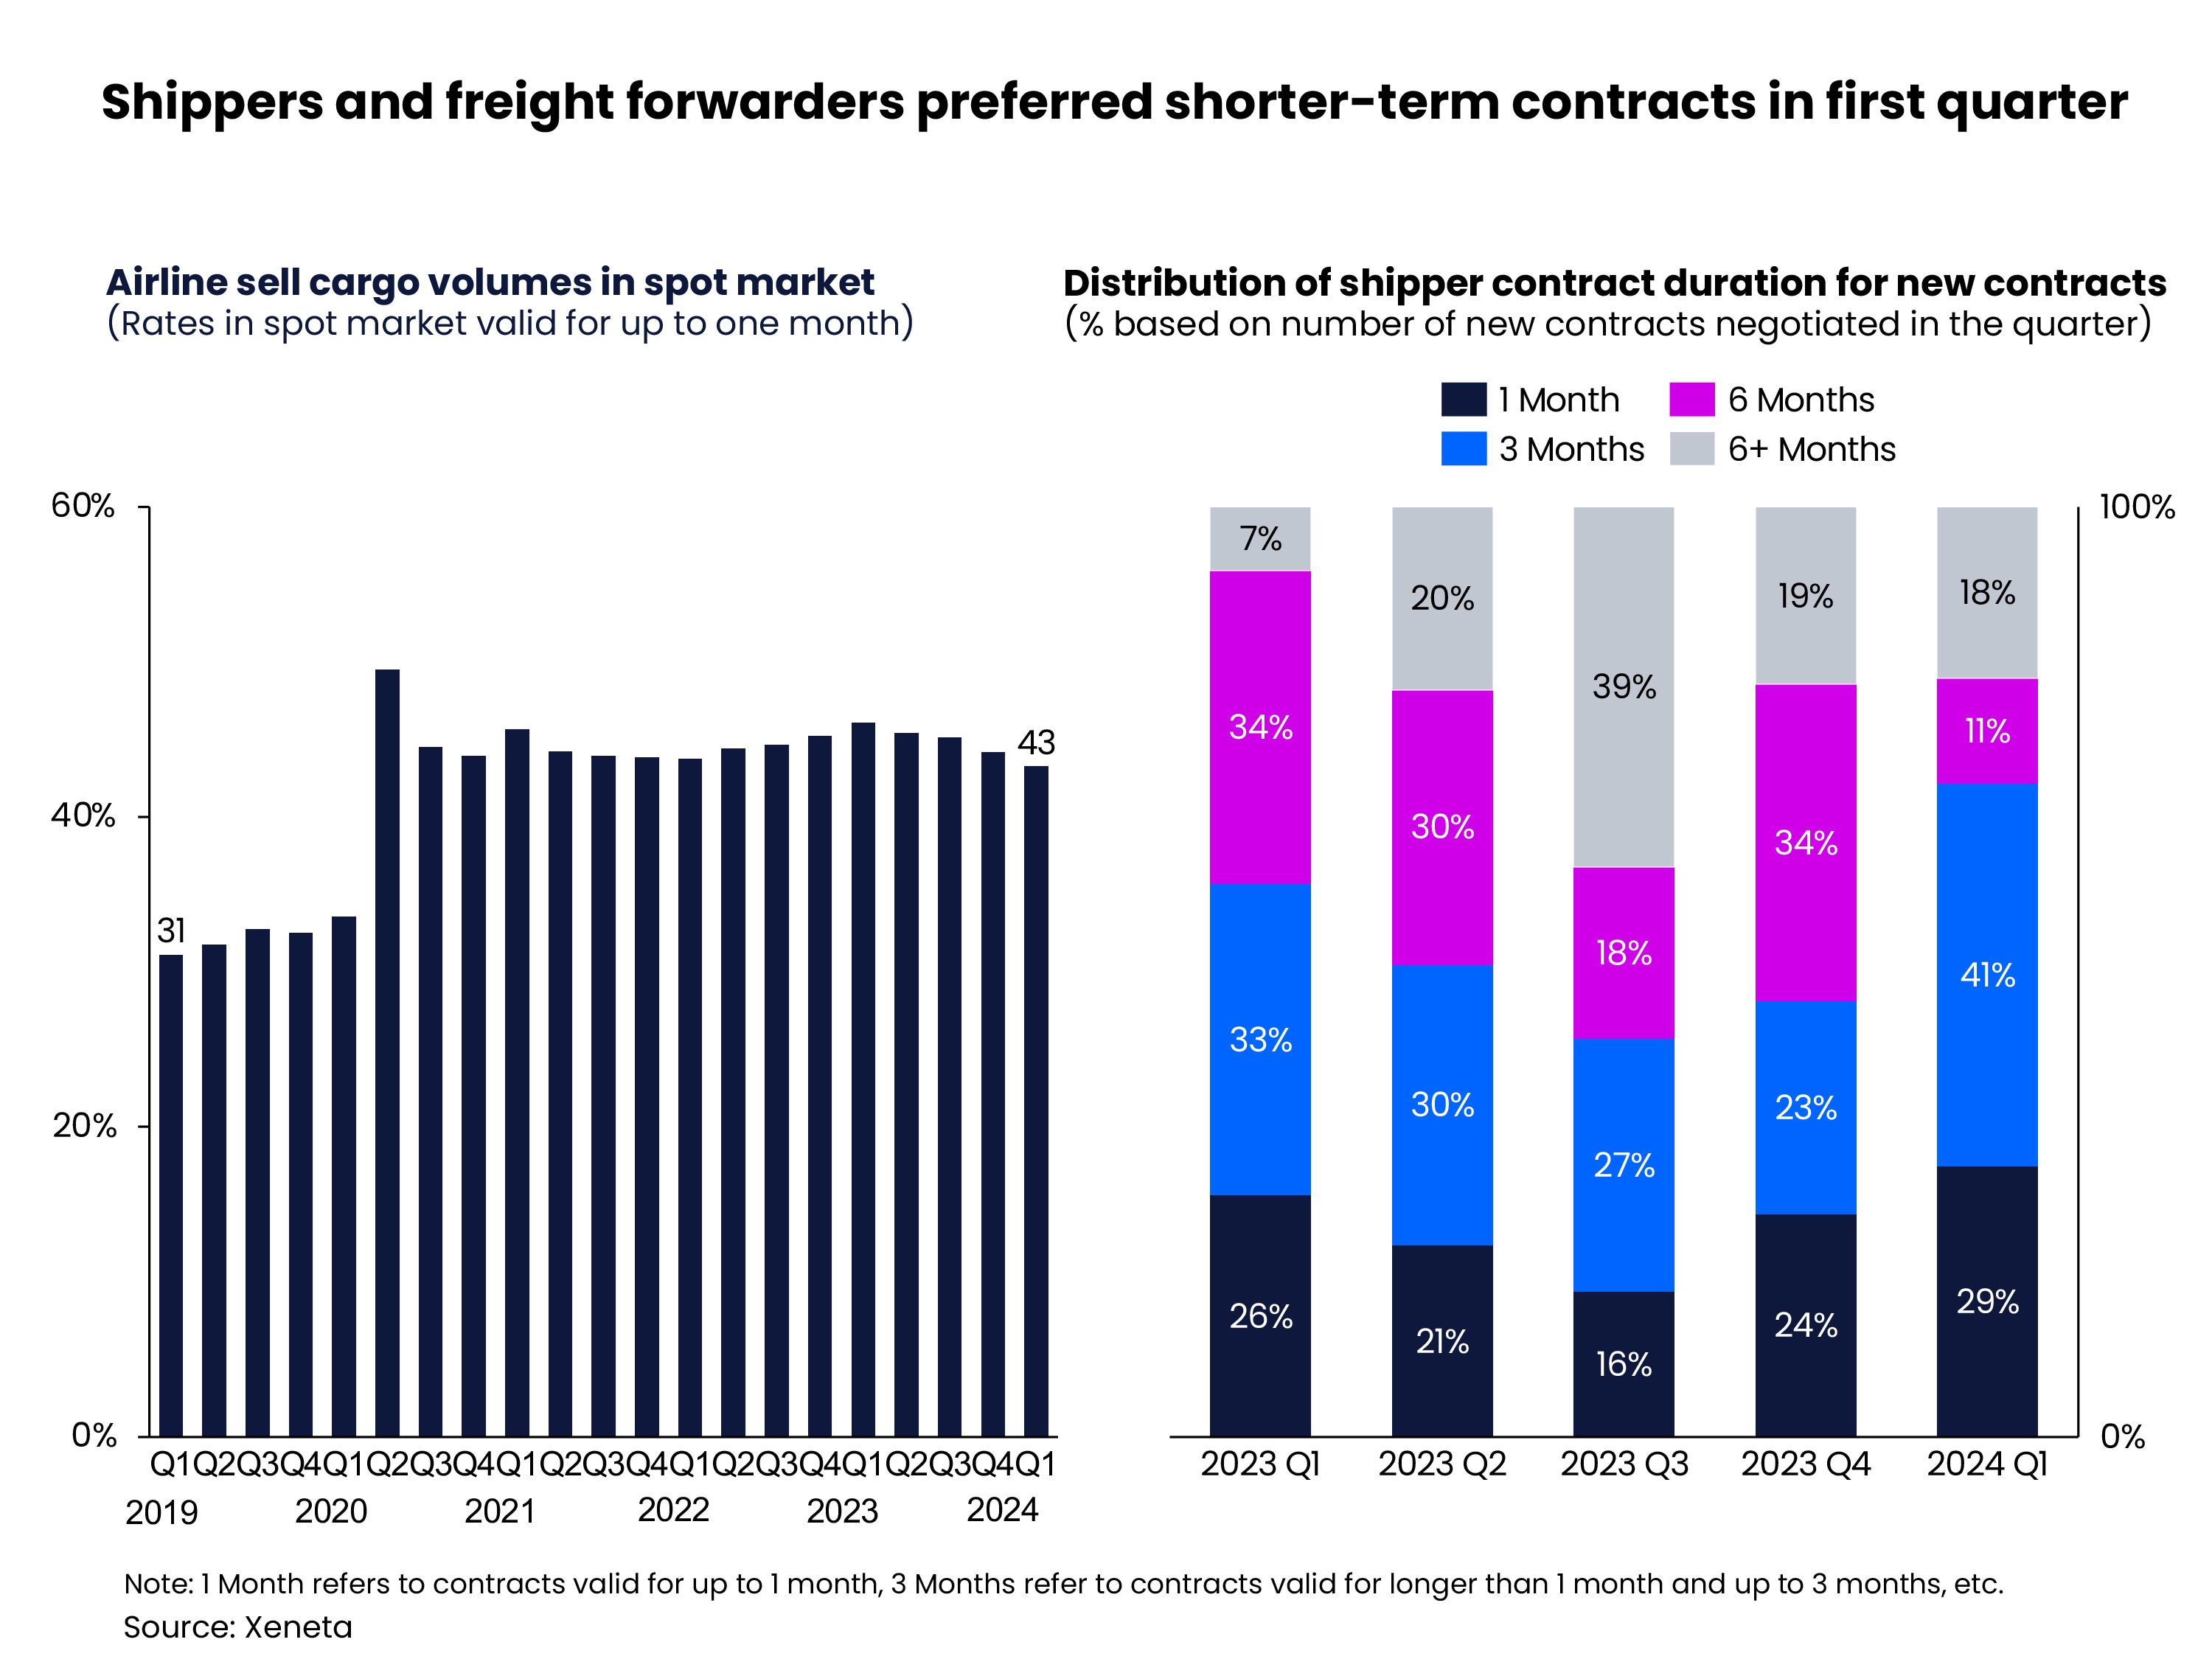 Shippers and freight forwarders preferred shorter-term contracts in first quarter